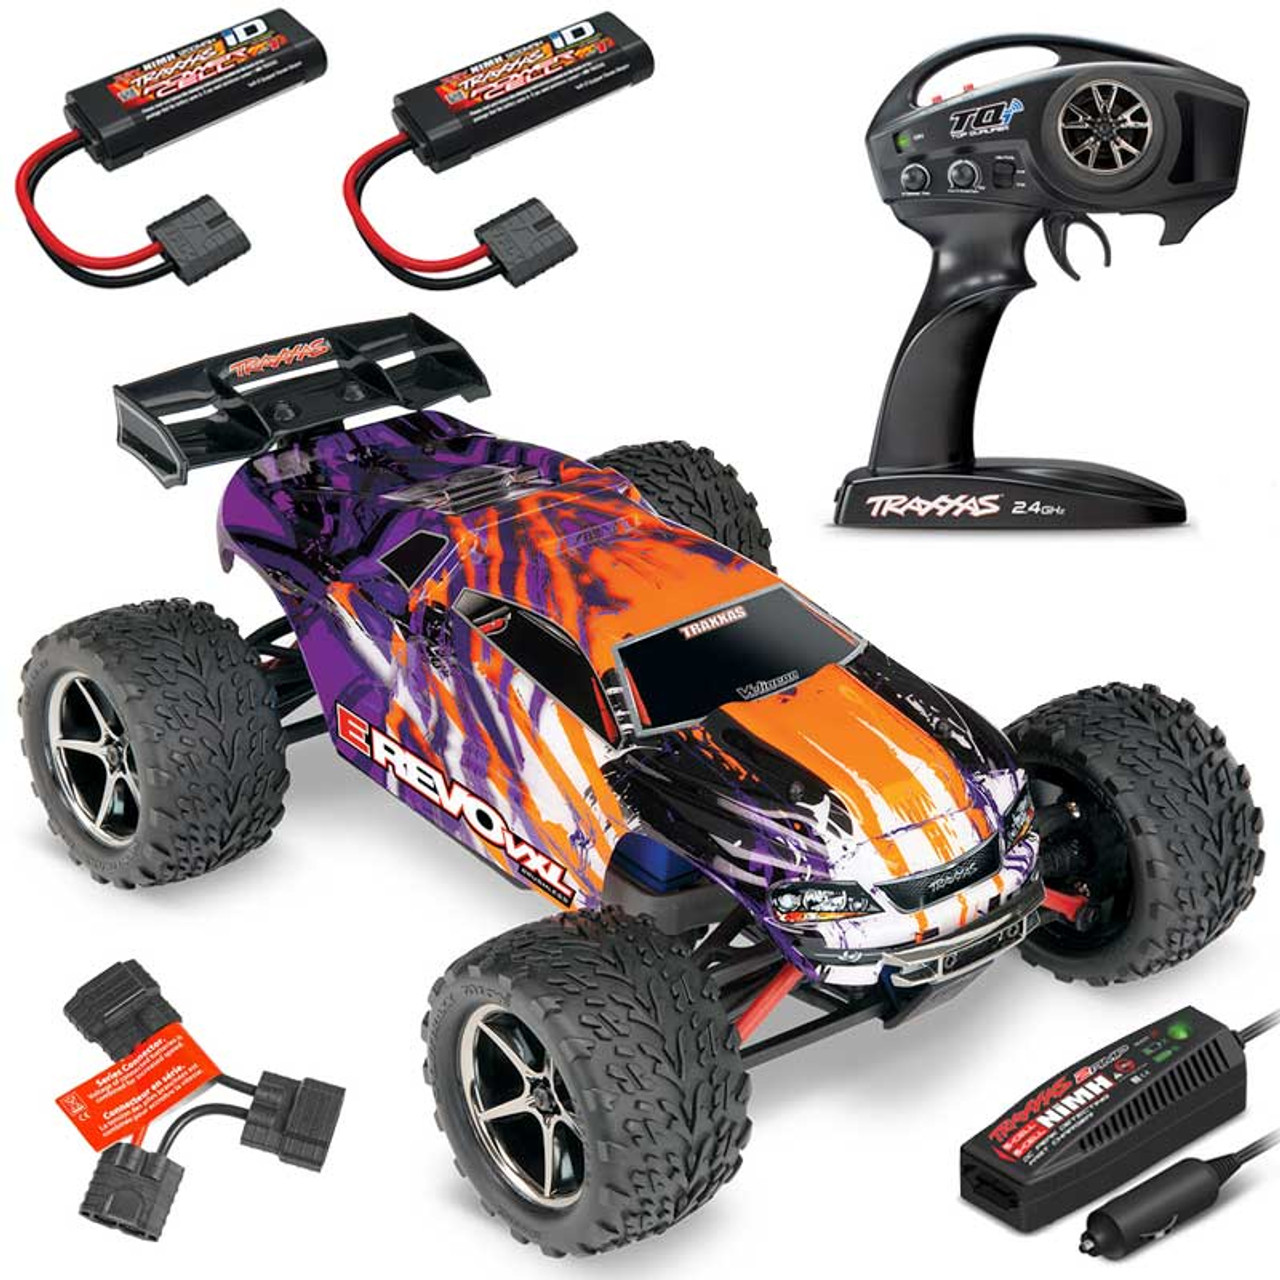 traxxas brushless rc cars